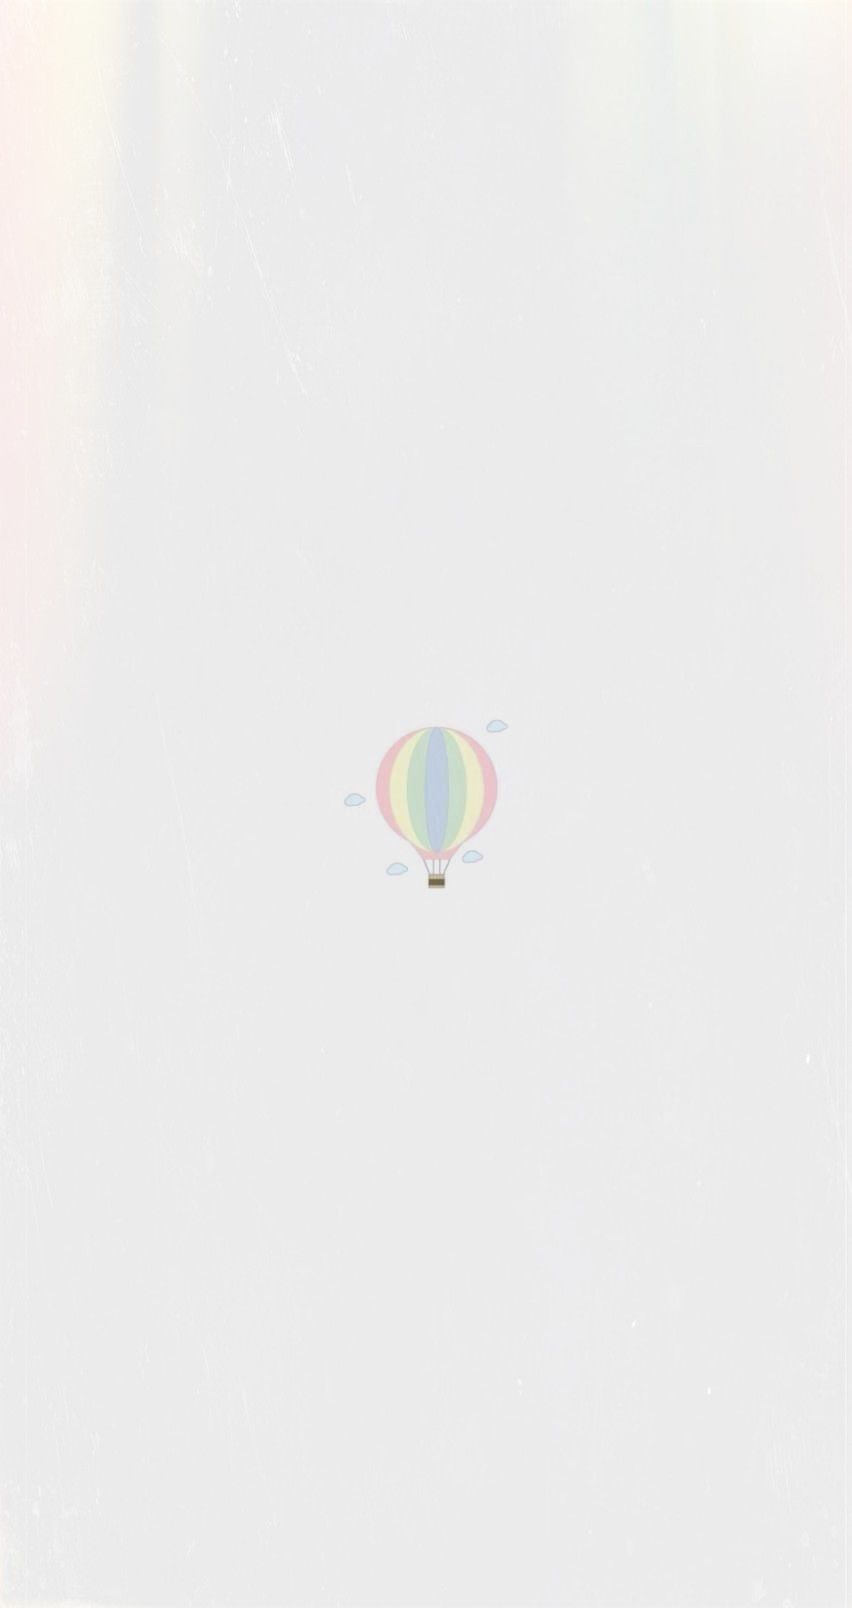 A hot air balloon is flying in the sky - Pastel minimalist